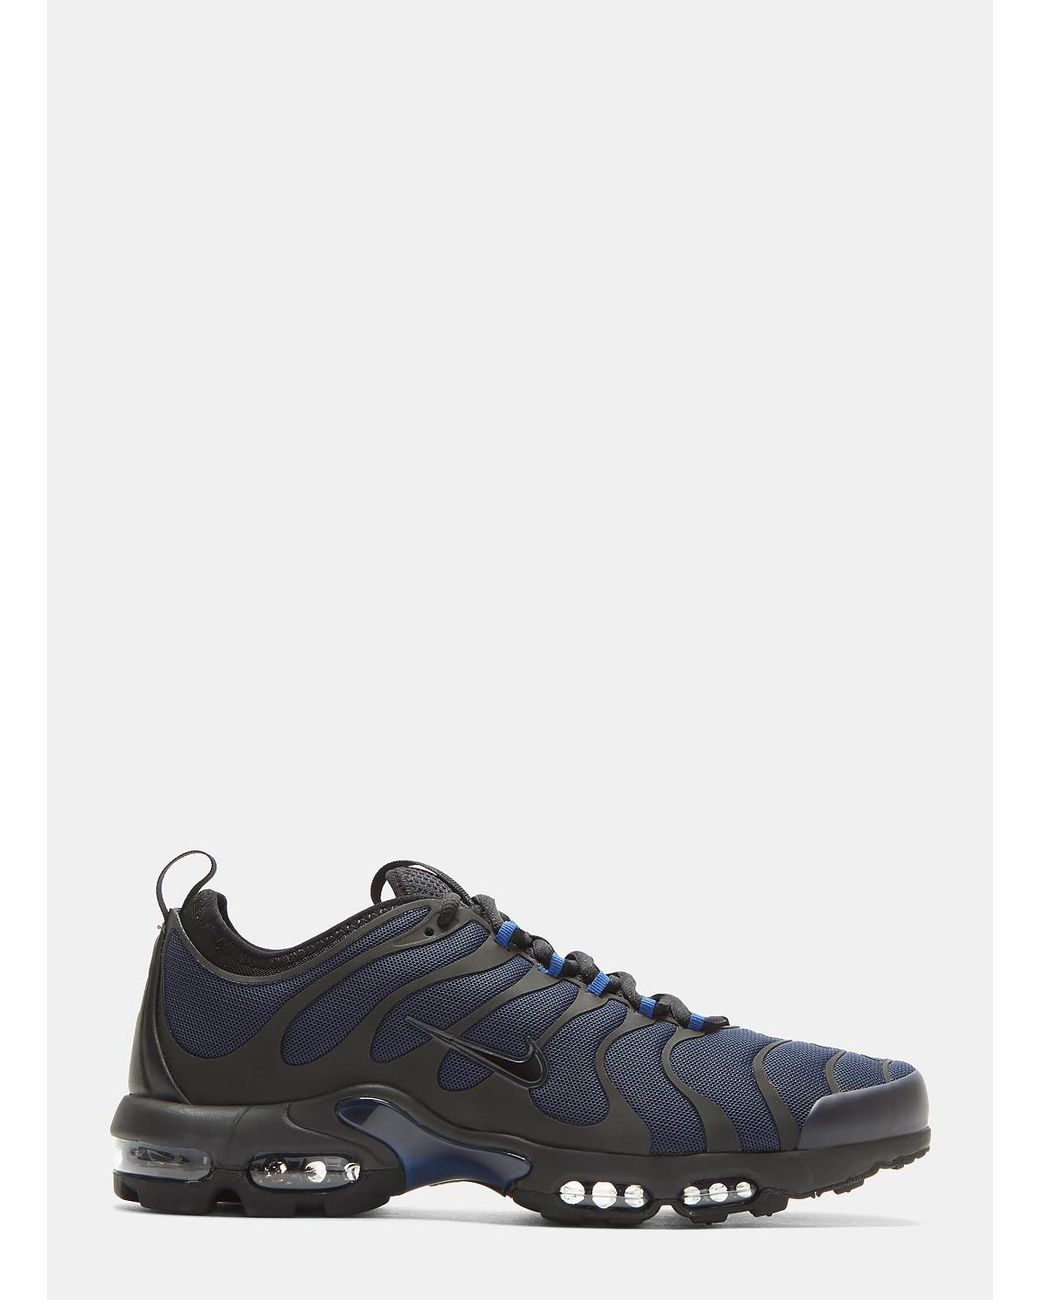 Nike Air Max Plus Tn Ultra Sneakers In Black And Navy for Men | Lyst  Australia